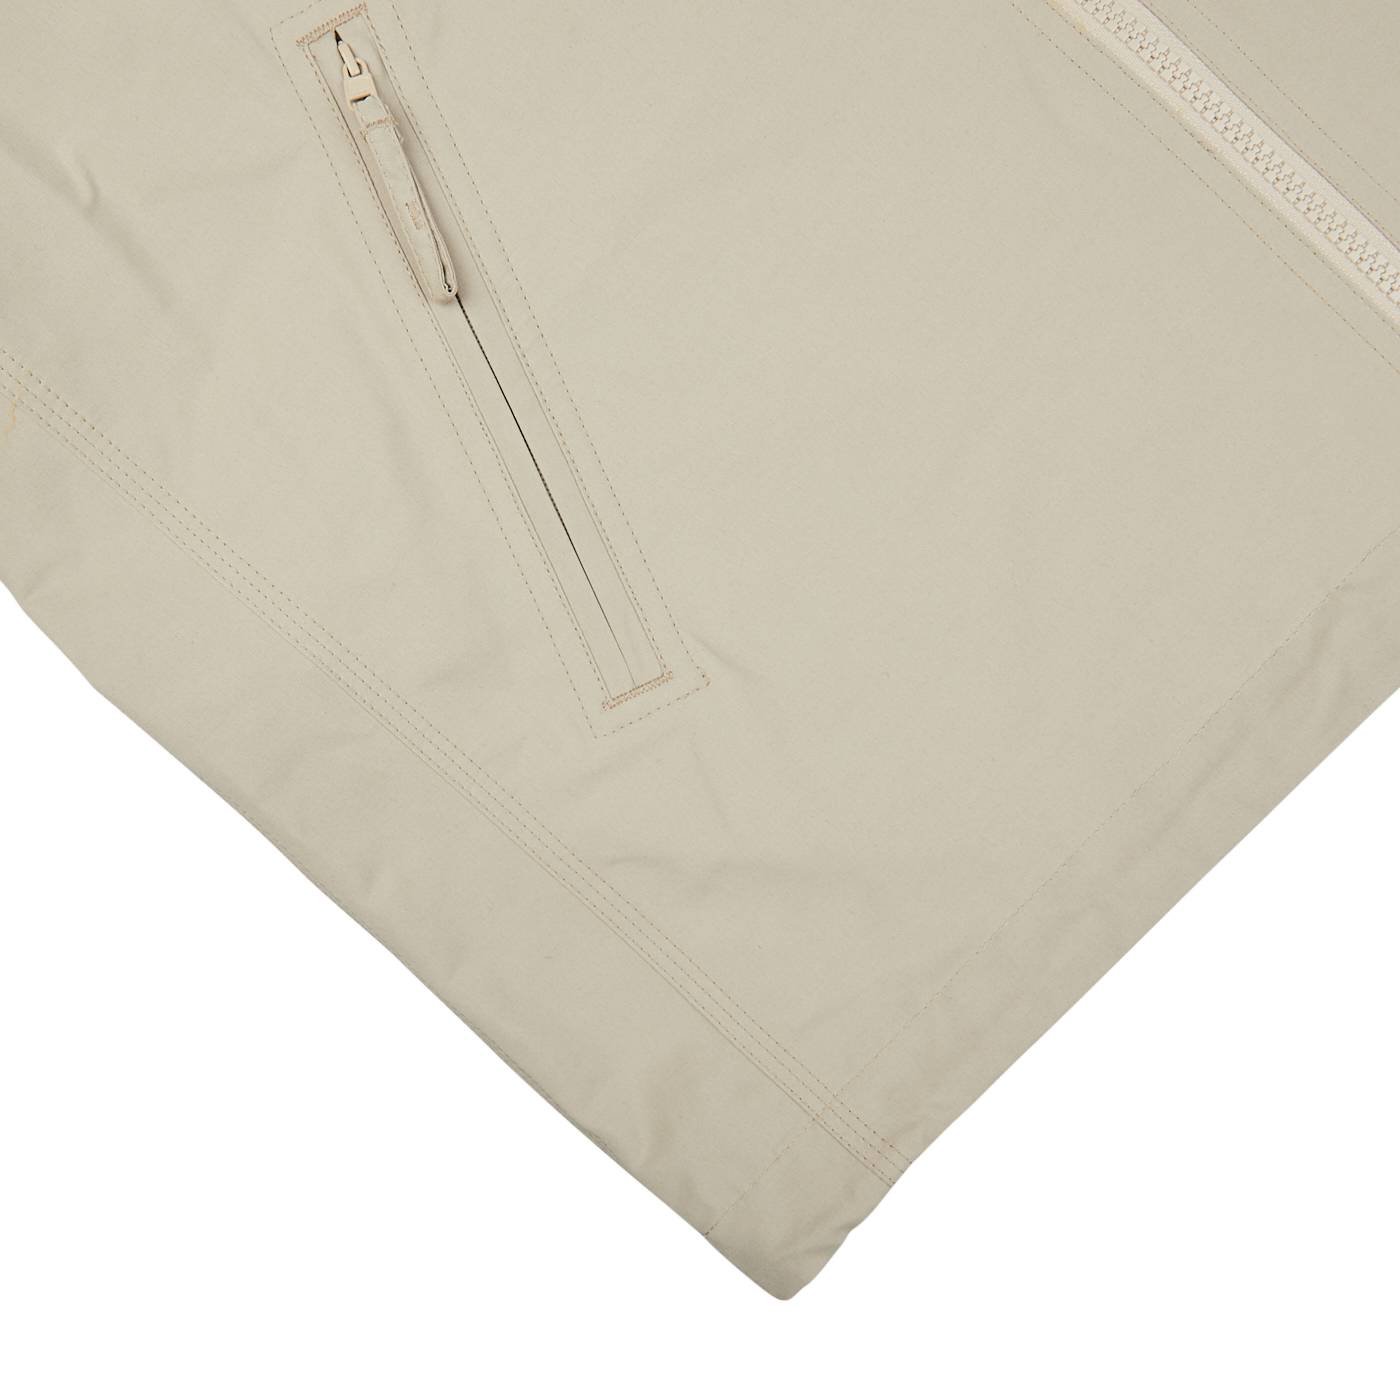 A beige Cotton Canvas Windbreaker Stringa jacket with zippers on the side by Aspesi.